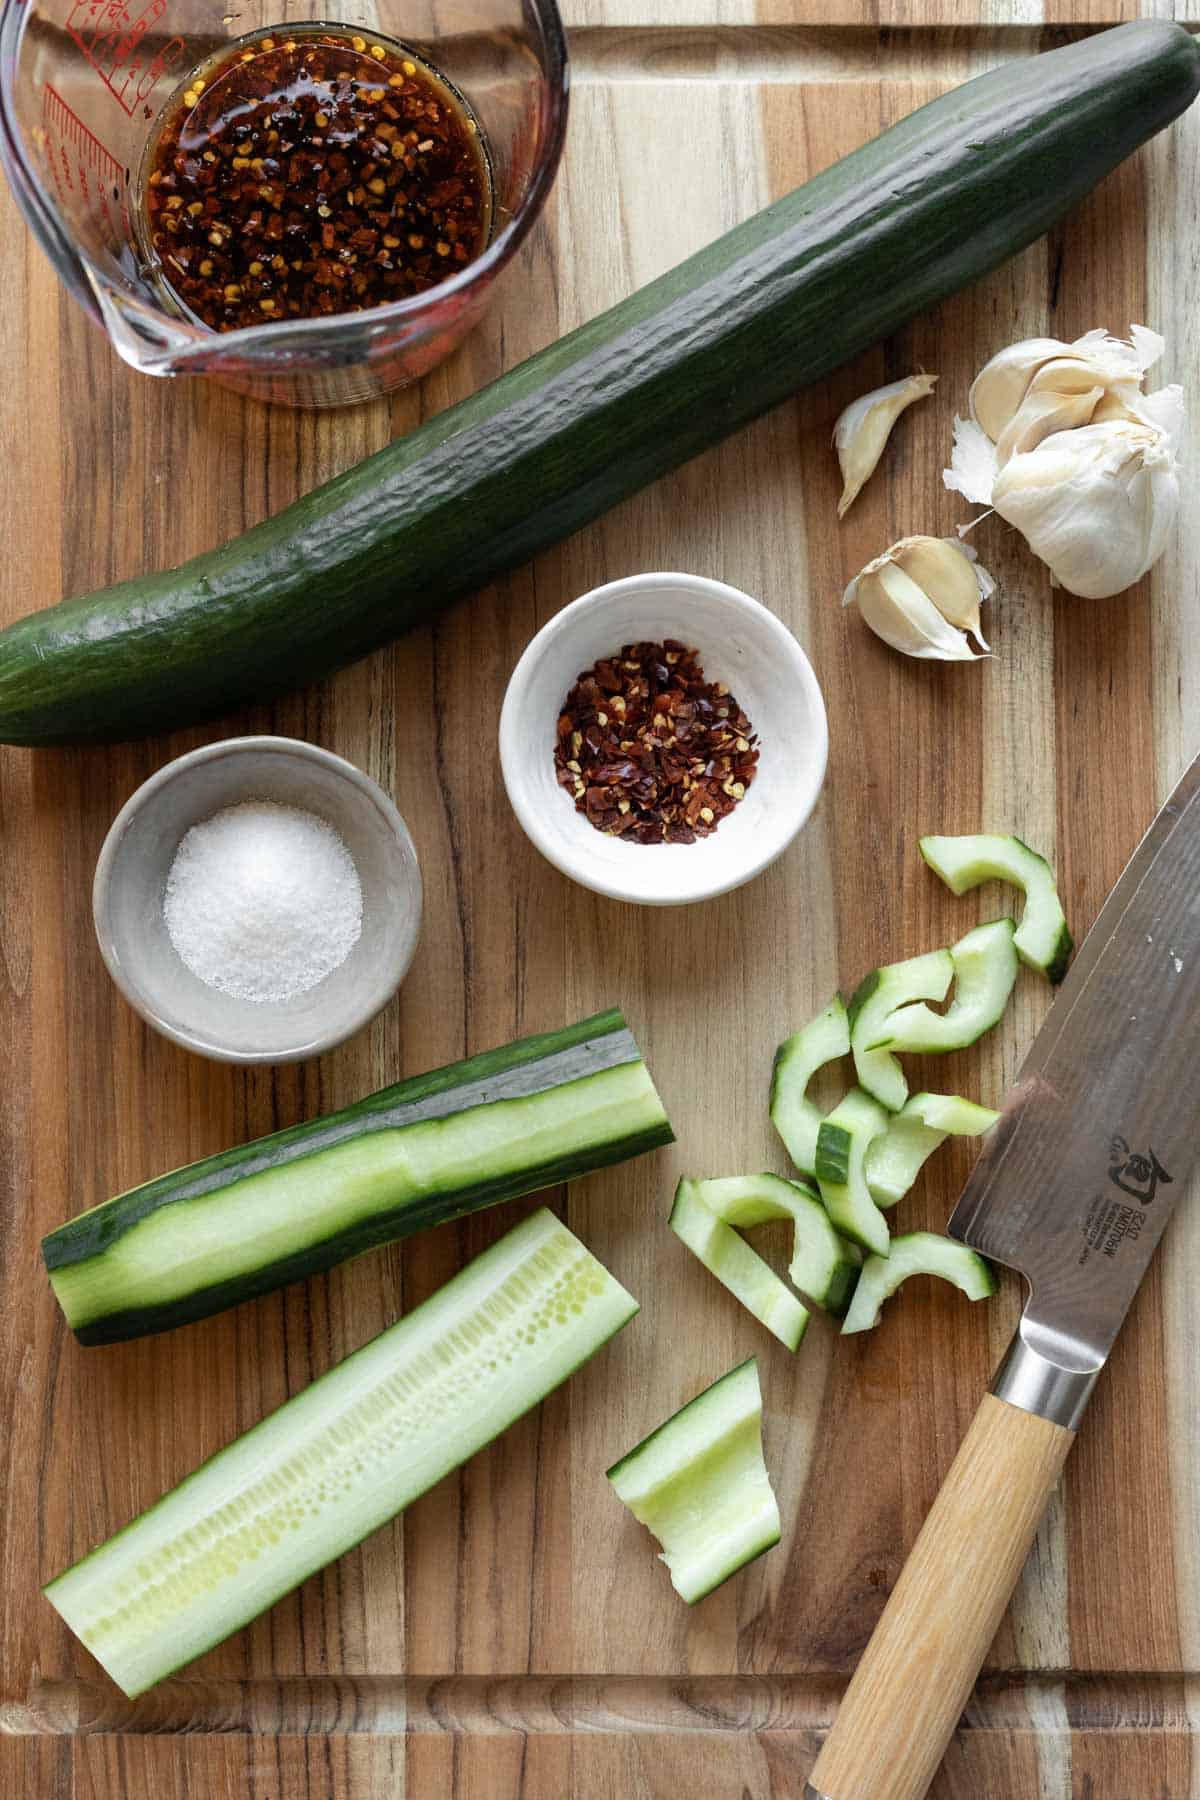 Slicing cucumbers for stir fry and other ingredients laid out on a wood cutting board.